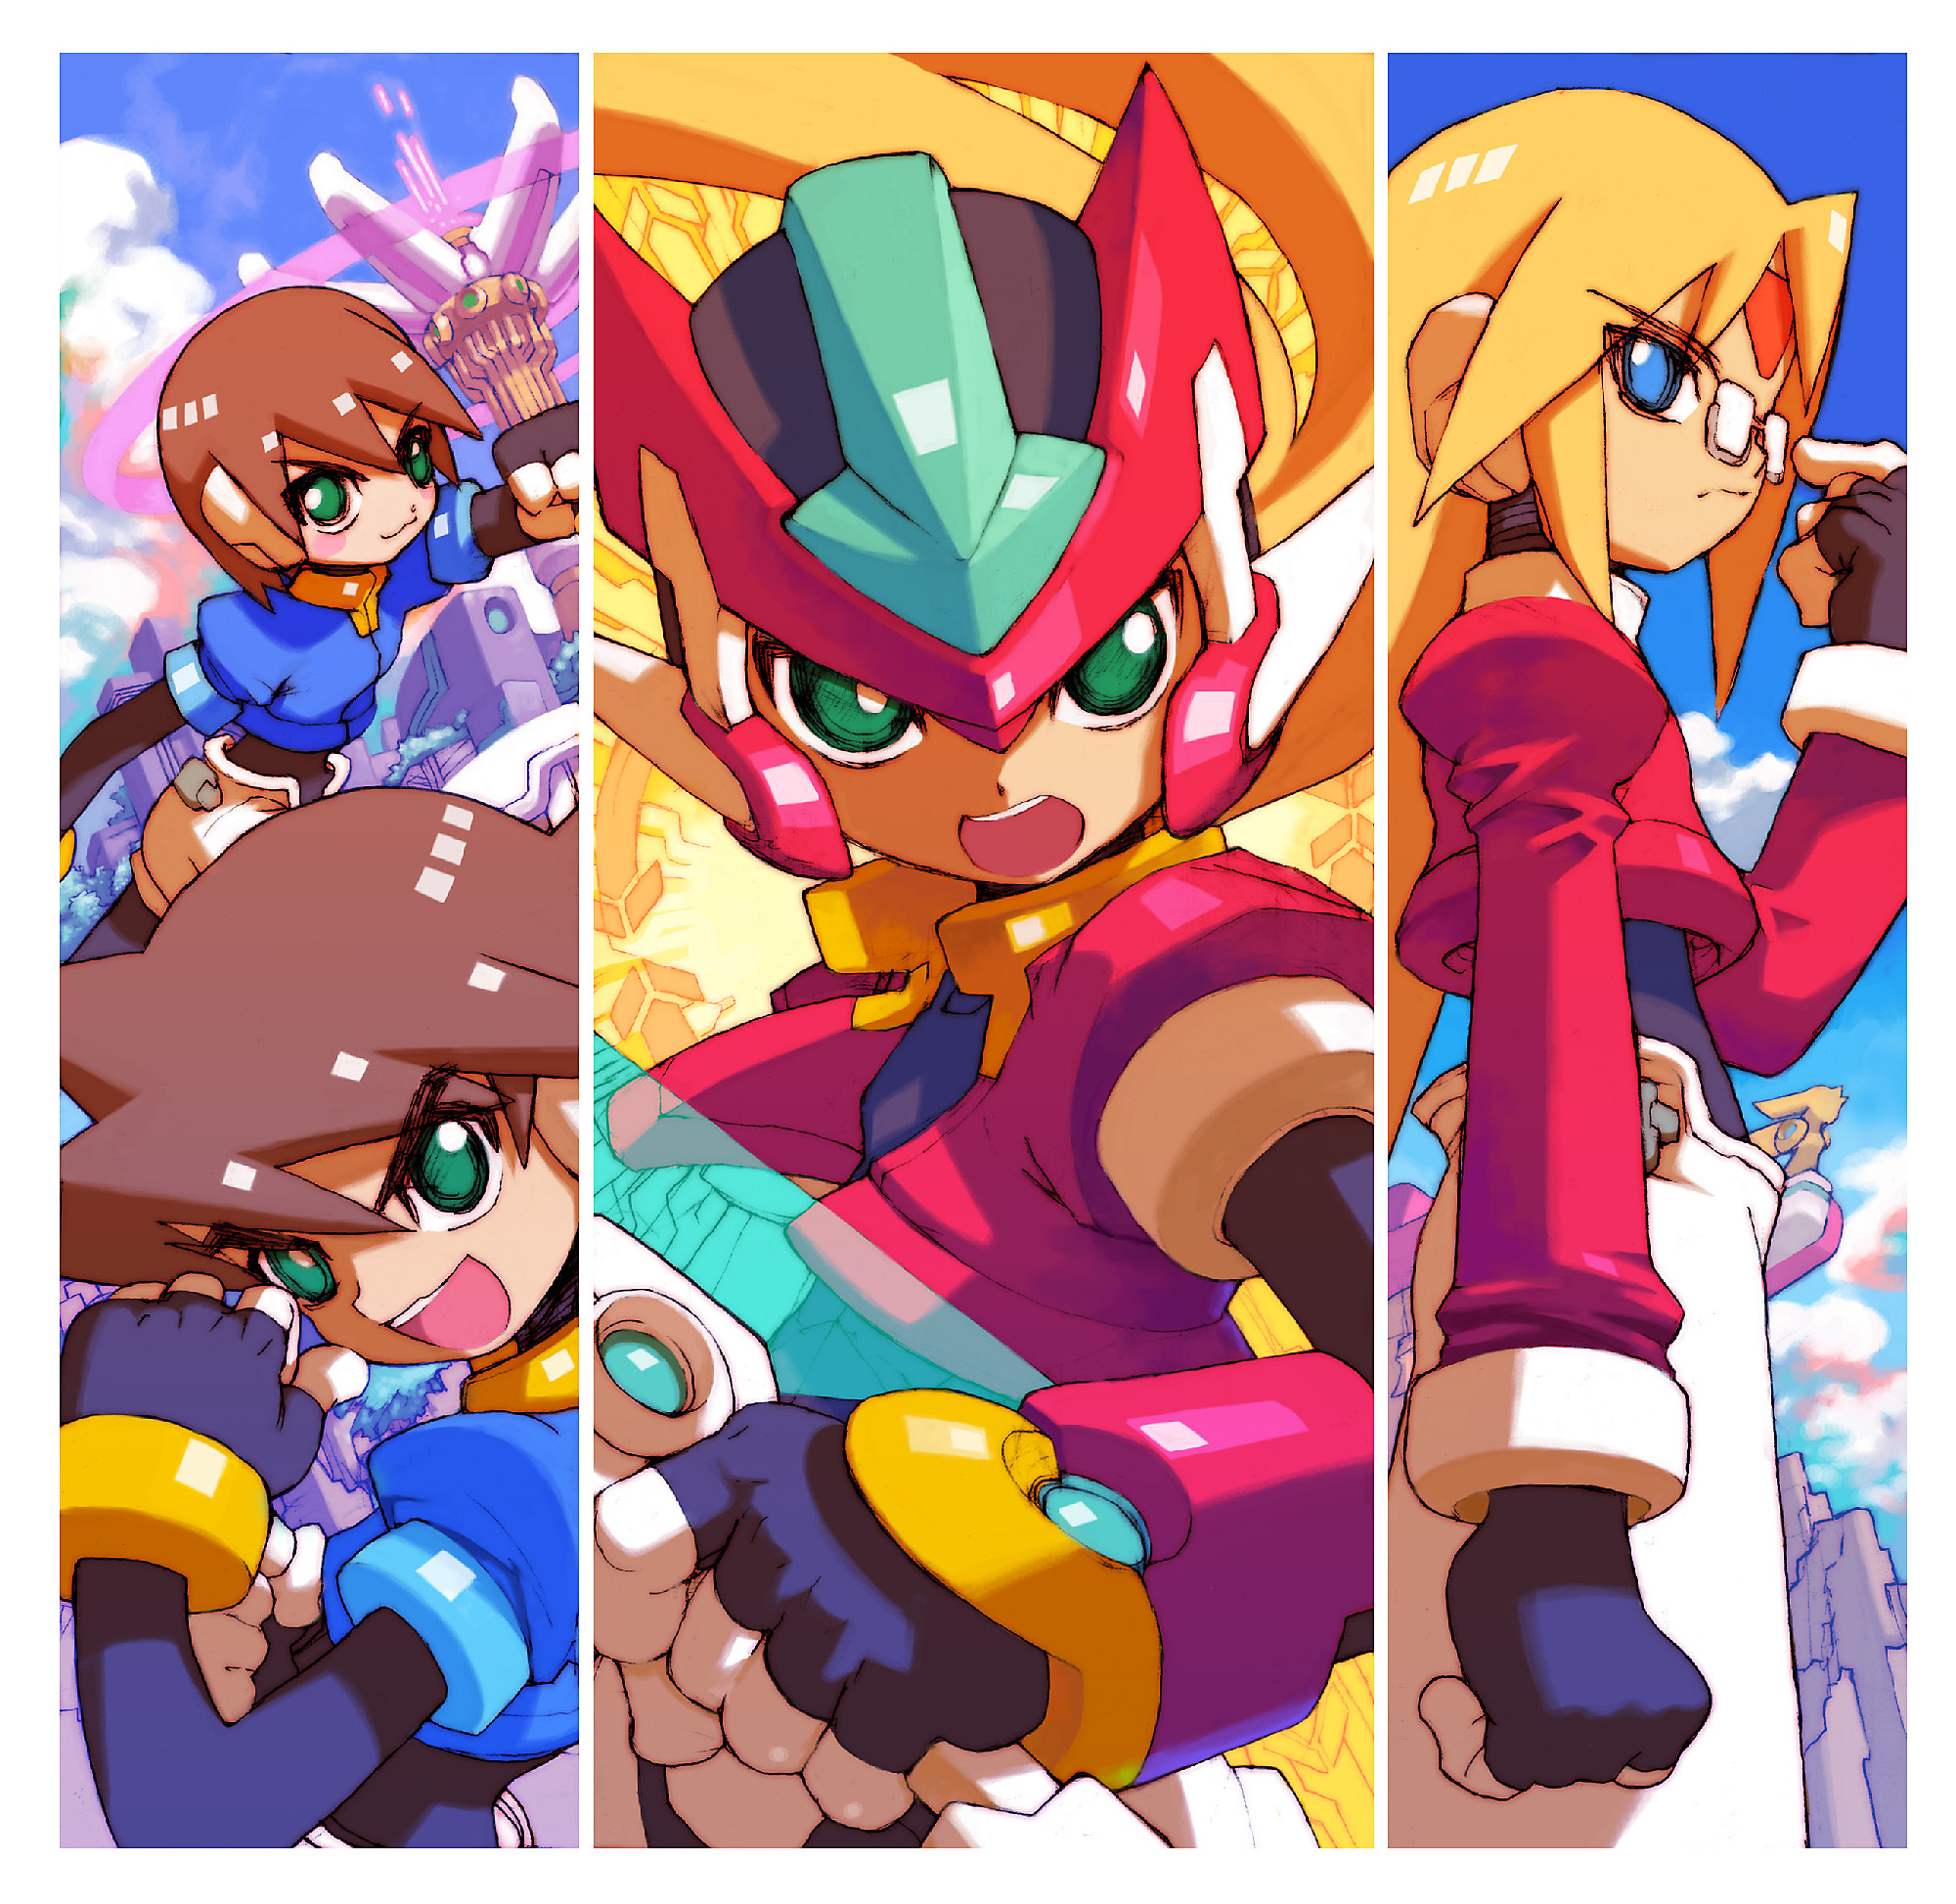 http://images1.wikia.nocookie.net/__cb20110426053442/megaman/images/a/a9/ZX_Promo.jpg